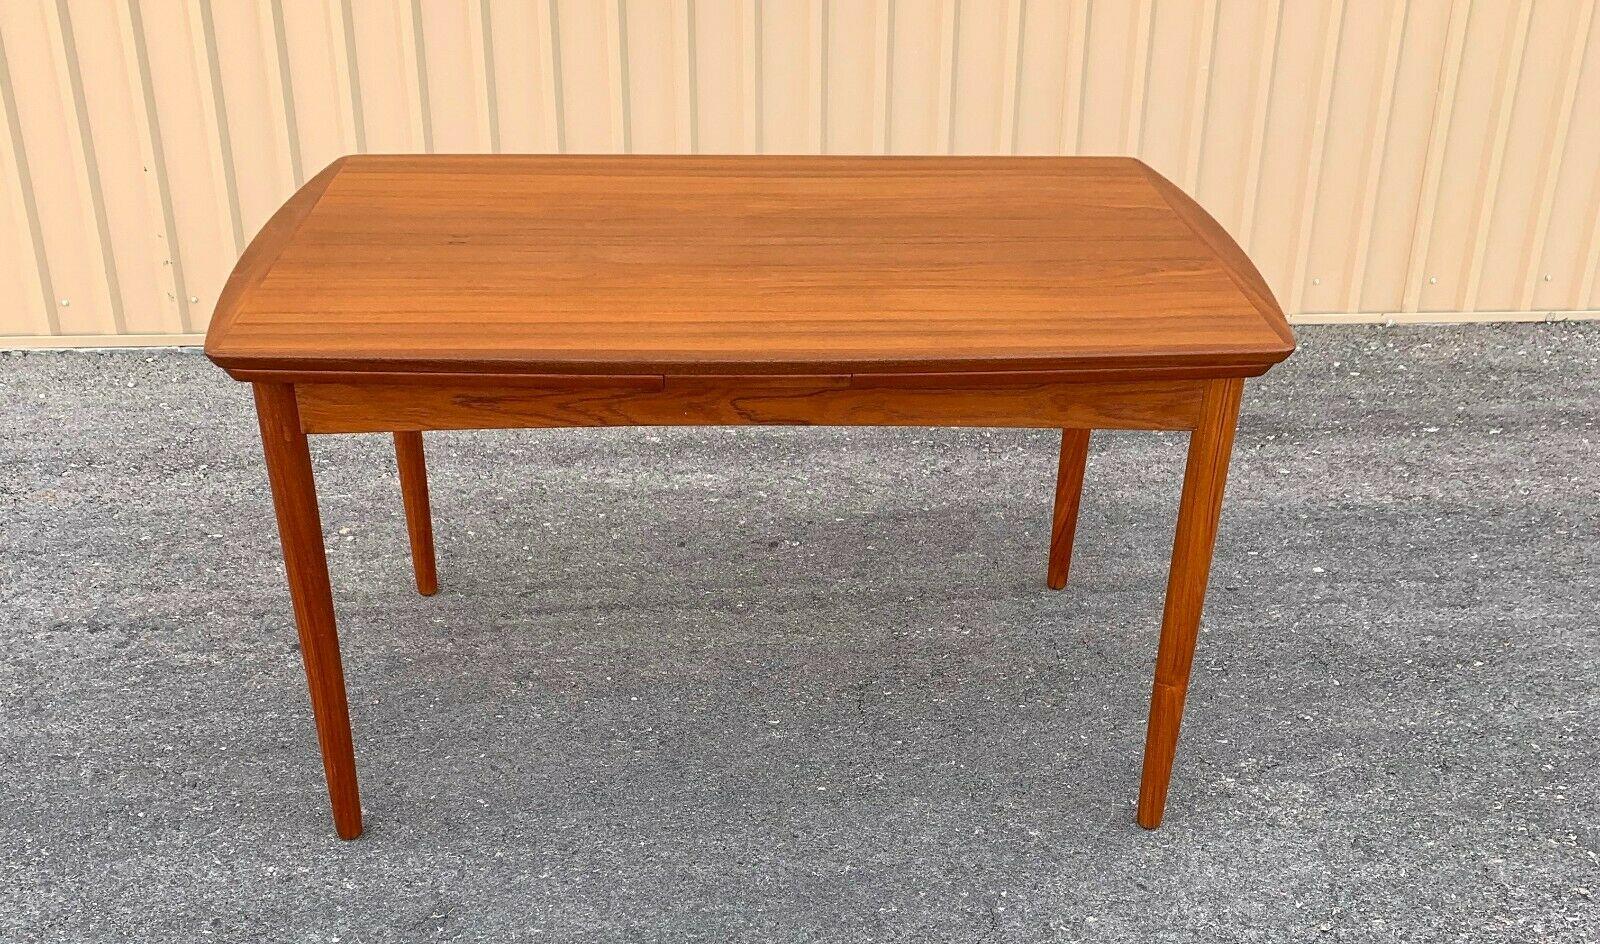 Teak dinning table by Povl Dinesen for Madvigs Alle Copenhagen Denmark
This Mid-Century Modern Danish dining table was designed by Povl Dinesen for Madvigs Alle n of Copenhagen Demark During the 1950s. The table features two extension pieces,